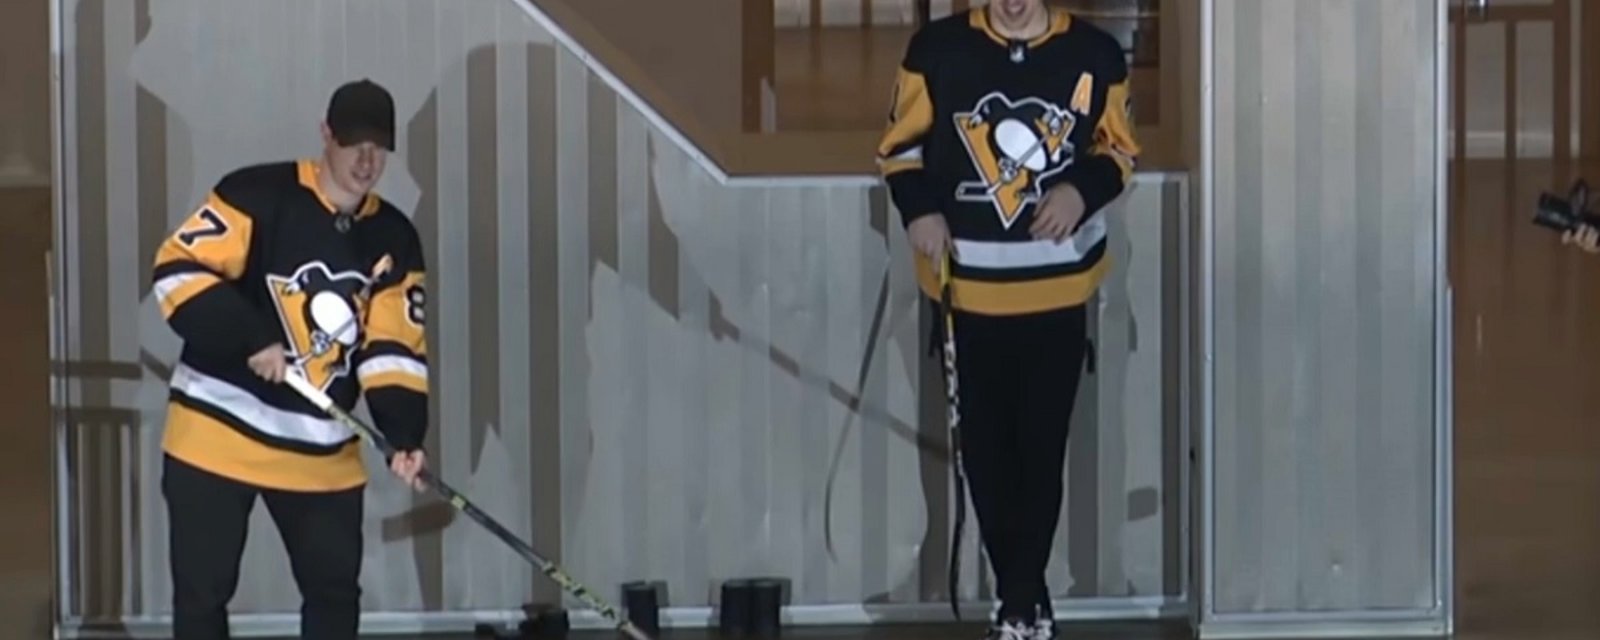 Rumor: Crosby and Malkin have just inspired a CRAZY new event at the NHL All Star Game.